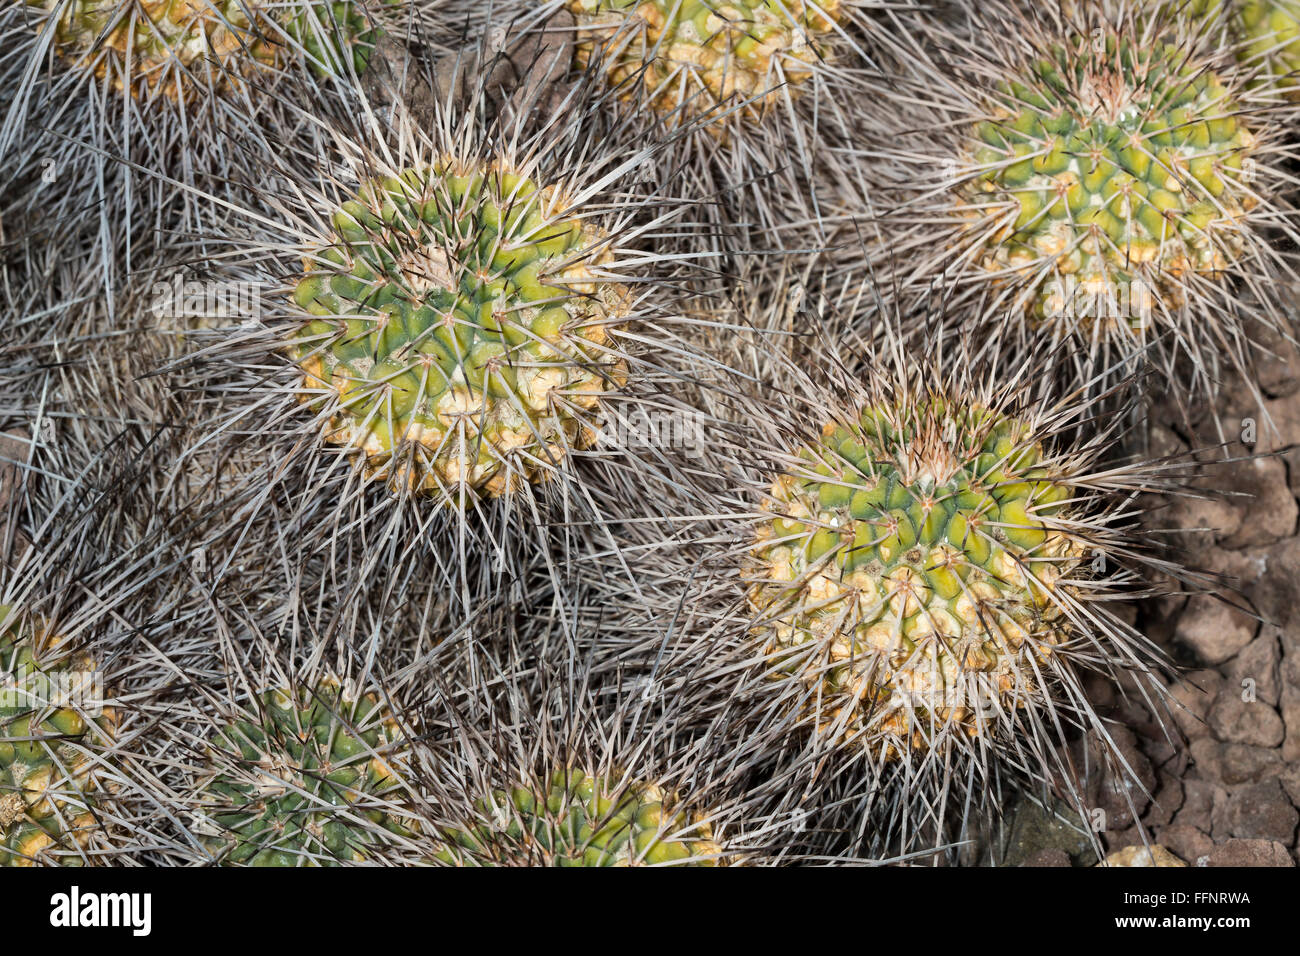 A spiked succulent plant with very long spines Stock Photo